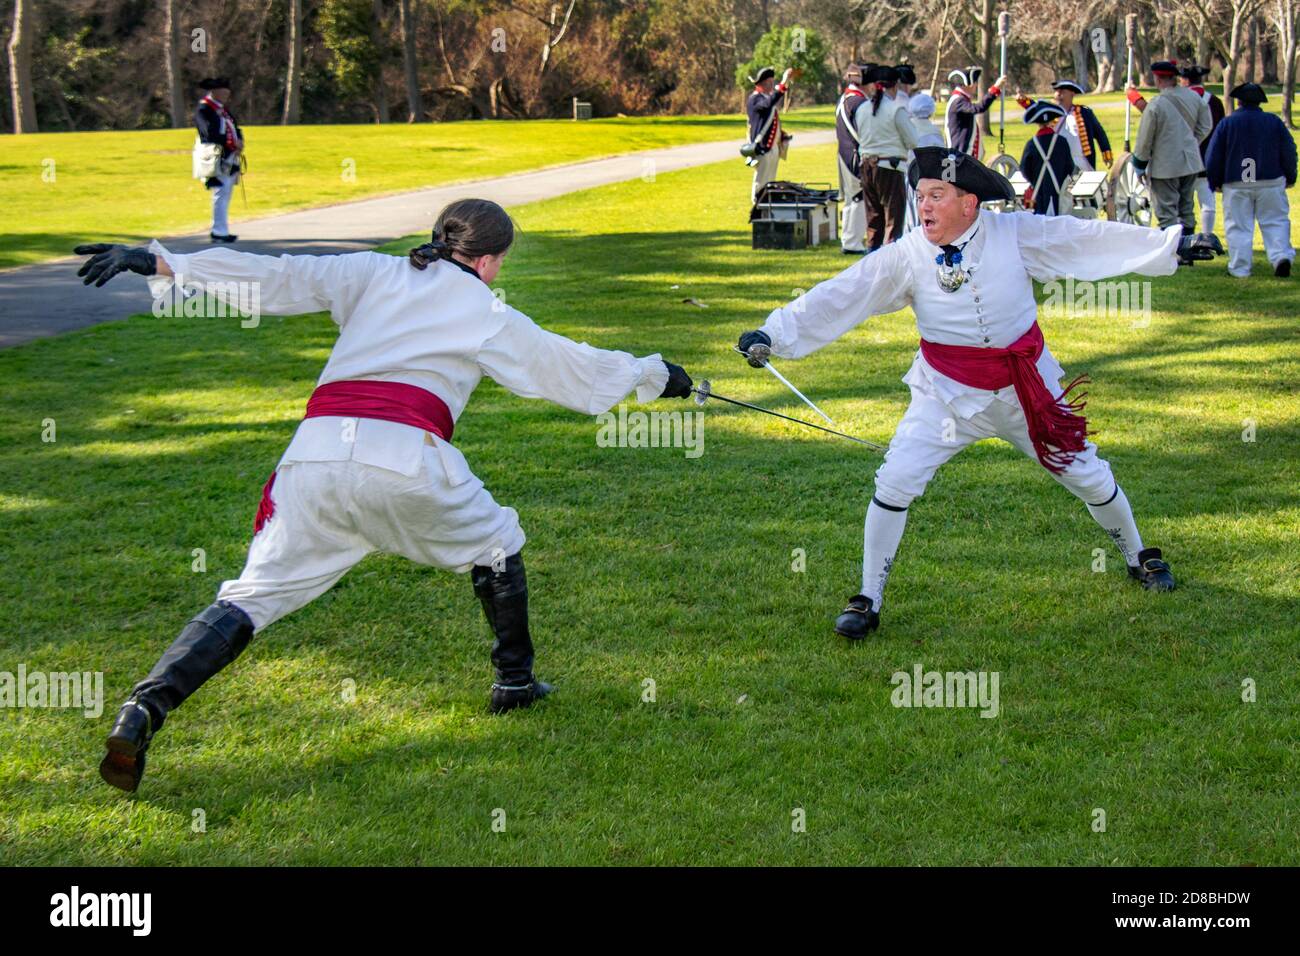 Actors in 18th-century British army uniforms demonstrate fighting techniques with short swords at an American Revolutionary War reenactment in a Hunti Stock Photo